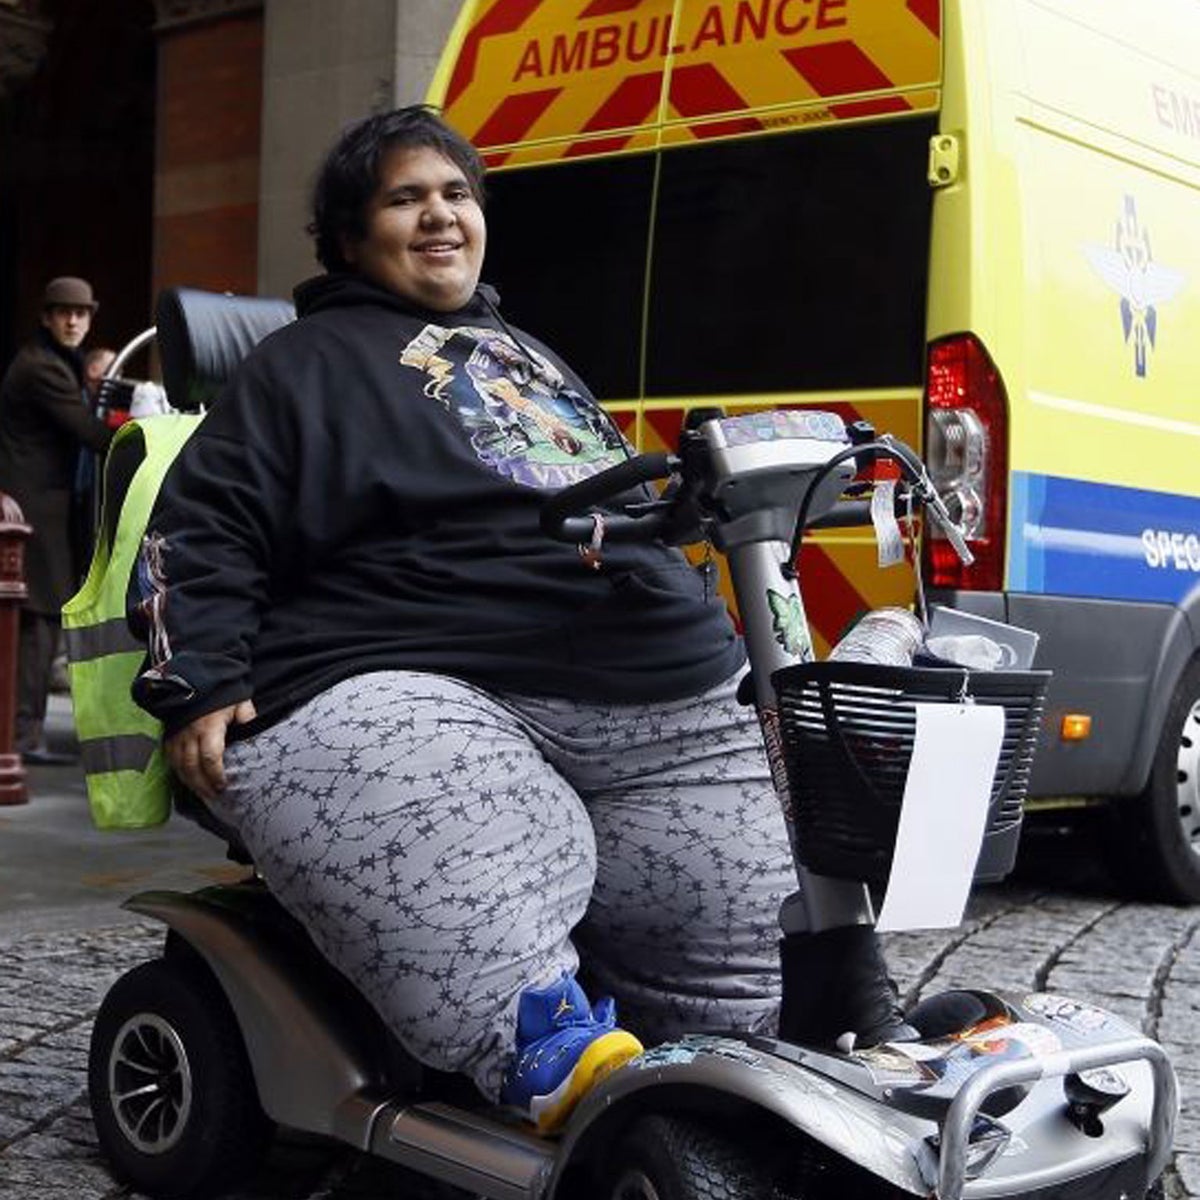 gentage matematiker anekdote Morbidly obese Frenchman Kevin Chenais unable to fly with BA or get train  with Eurostar saved in journey home by cross-Channel ferry | The  Independent | The Independent